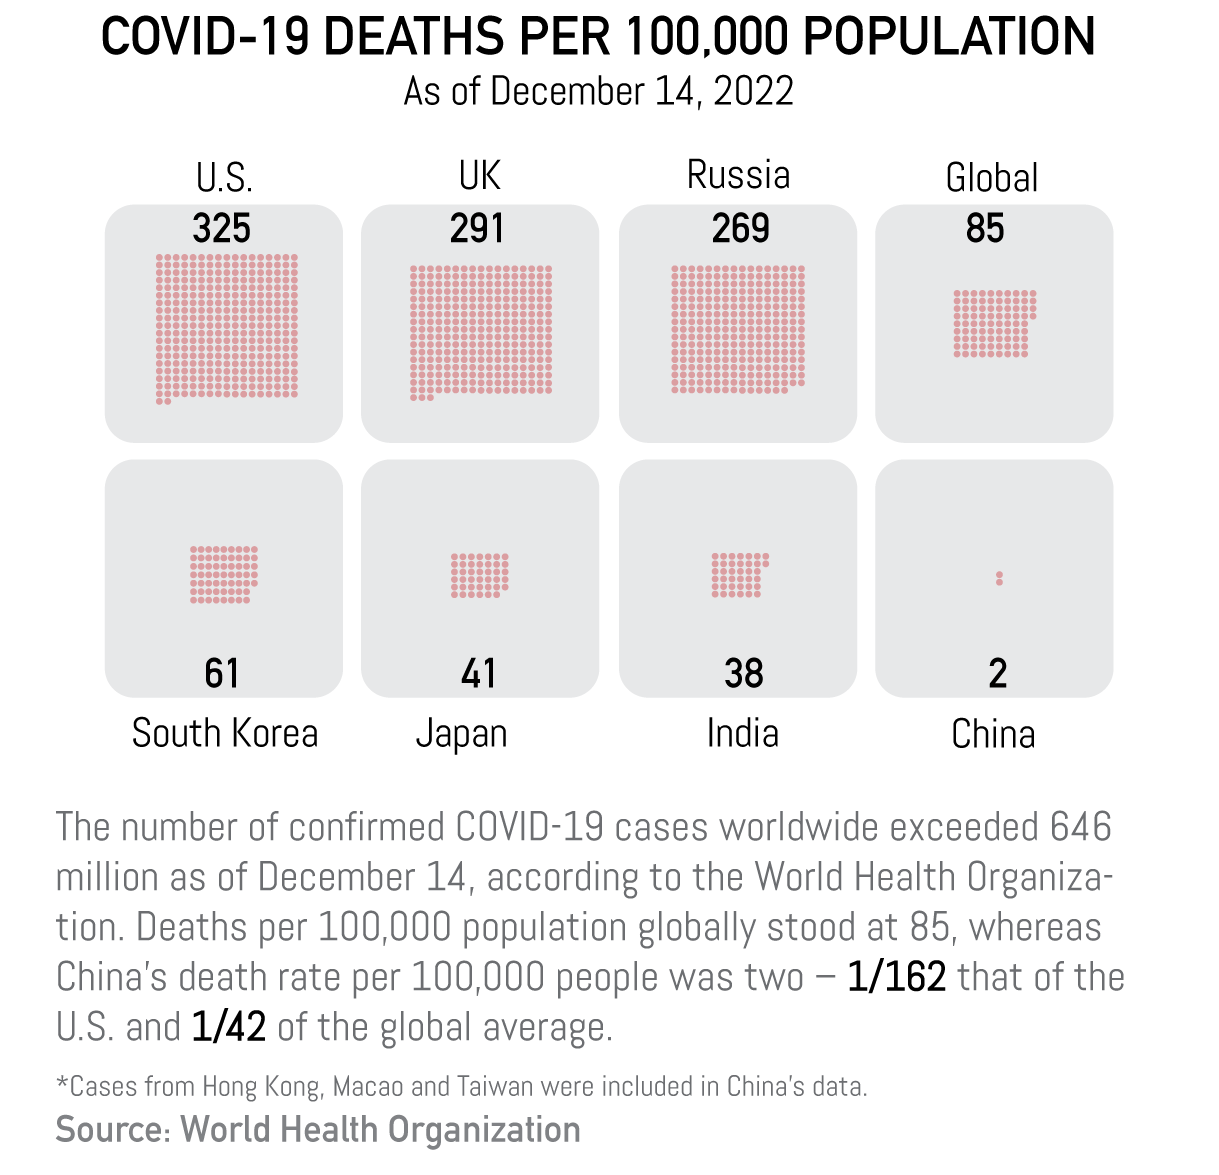 China's COVID-19 fight in numbers: Death rate far below global average